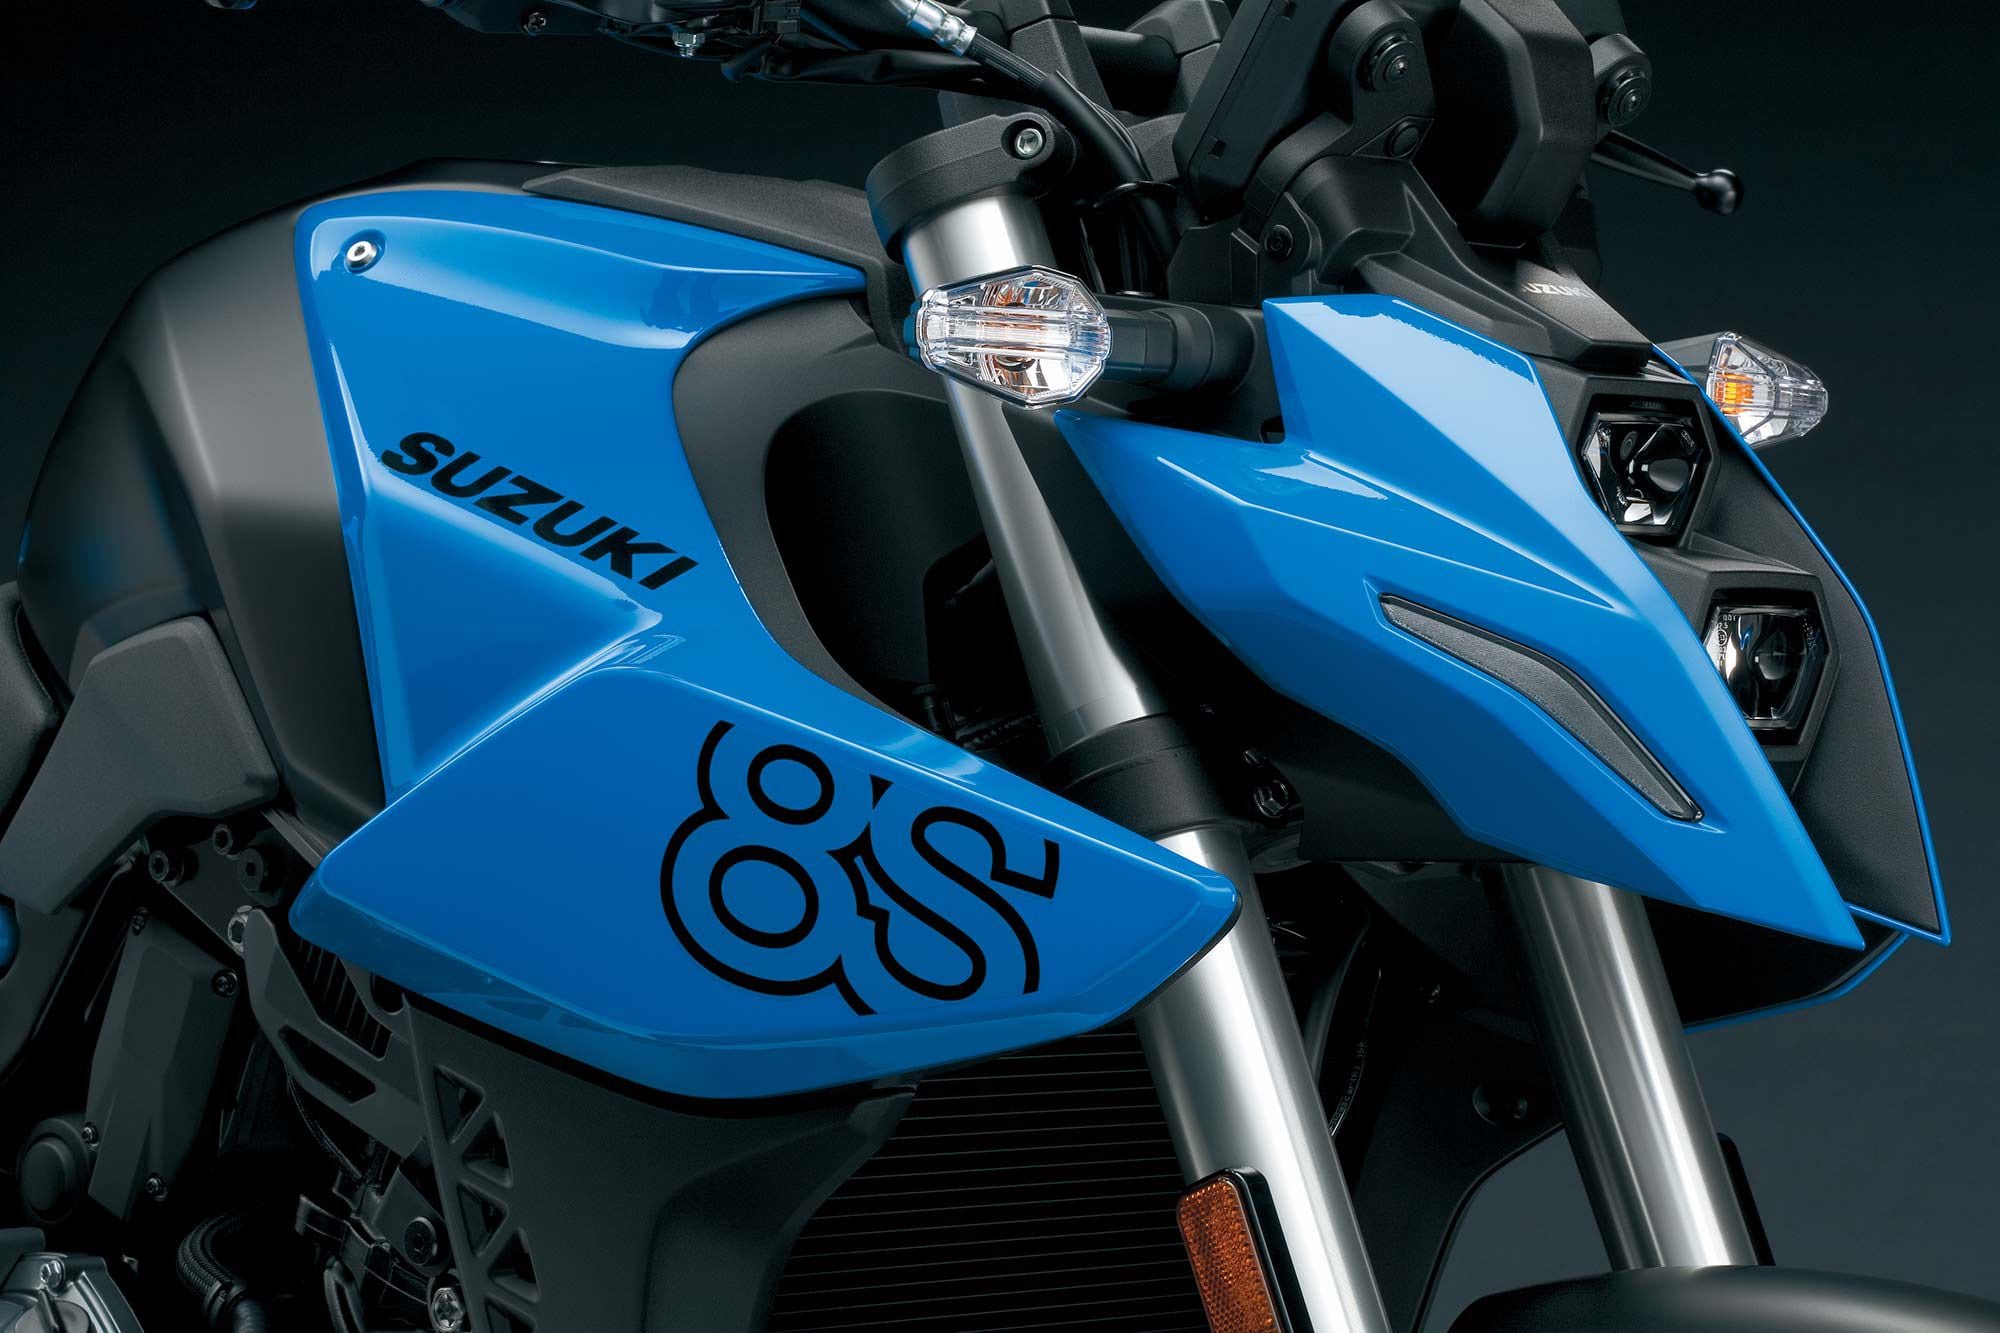 The pointed beak and stacked LED headlights make the 8S a spitting image of the GSX-S1000.